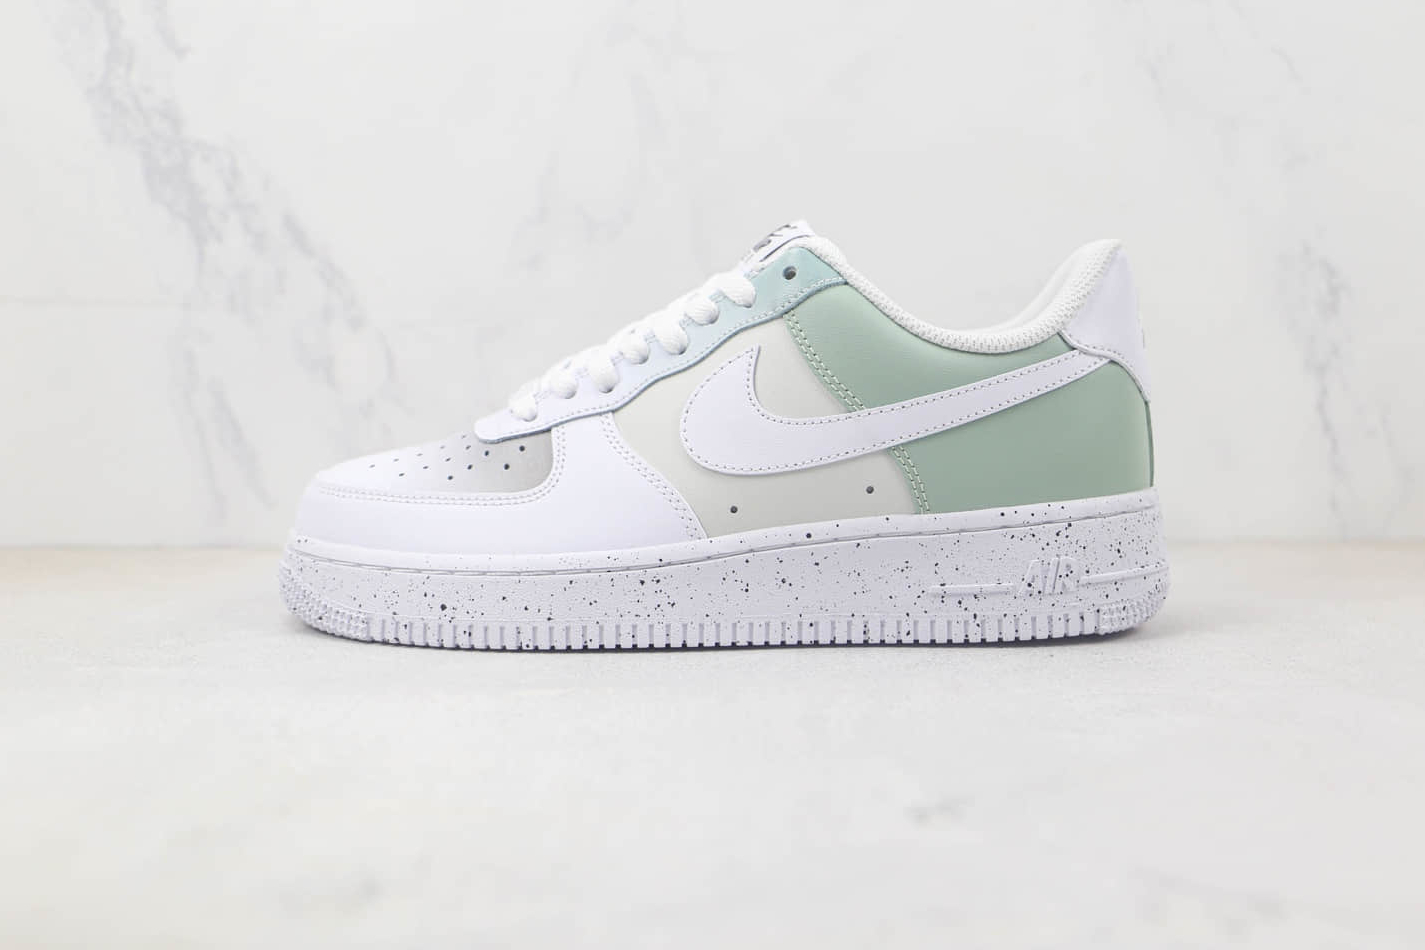 Nike Air Force 1 07 Low White Light Green Grey MM6023-336 - Stylish and Versatile Sneakers